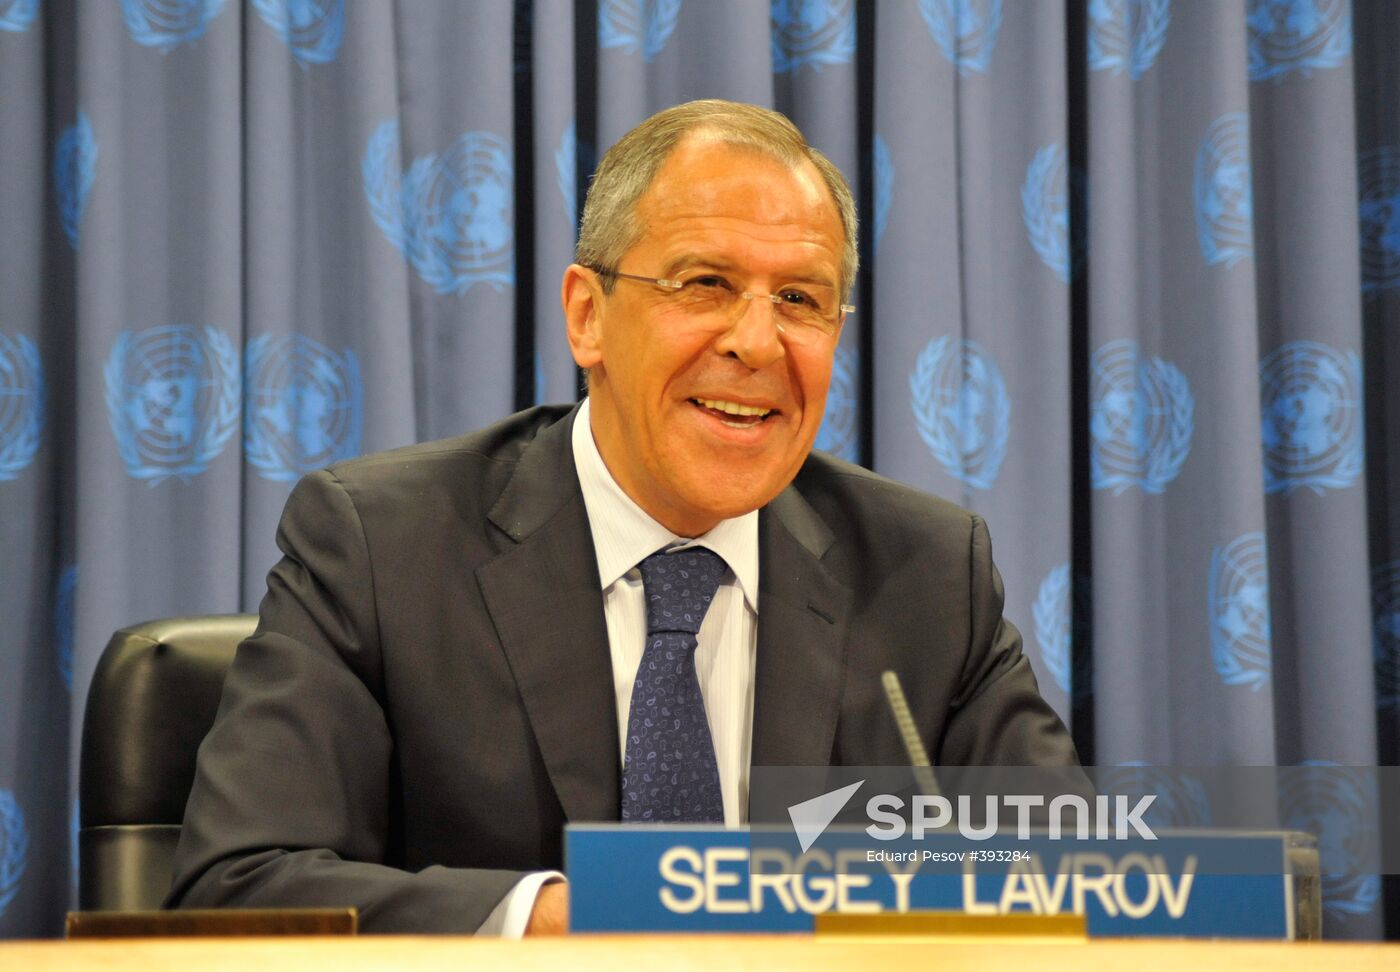 Sergei Lavrov at a news conference in New York City